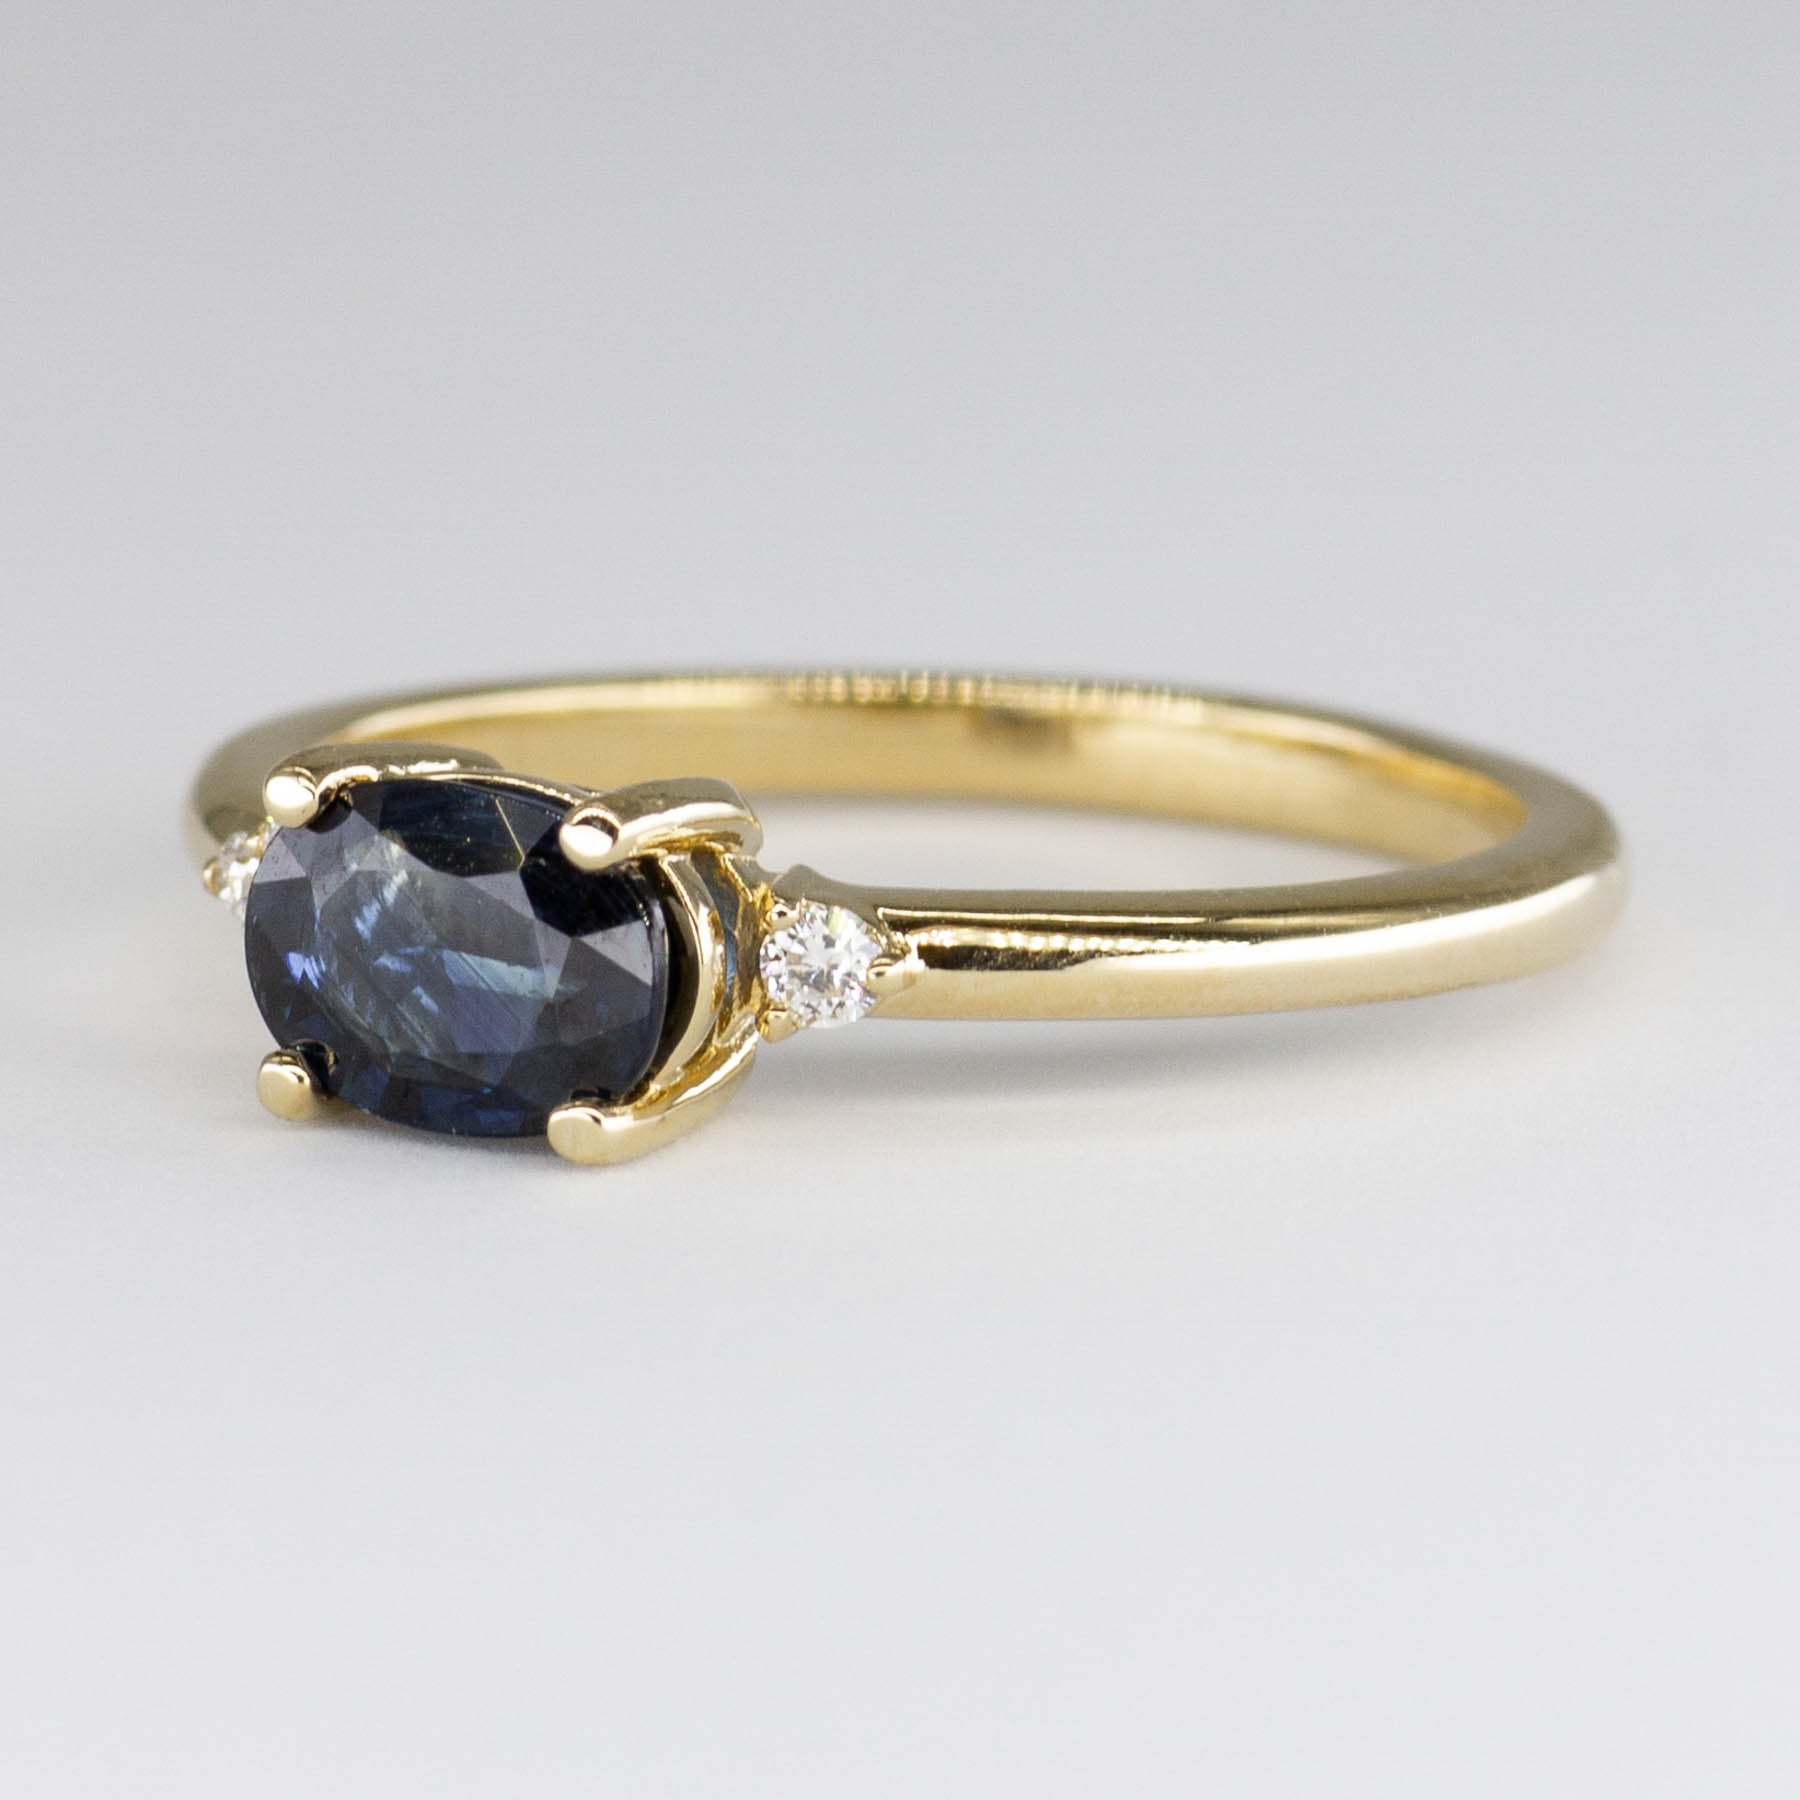 '100 Ways' 14k Yellow Gold East West Sapphire and Diamond Ring | 0.80ct | SZ 7 - 100 Ways